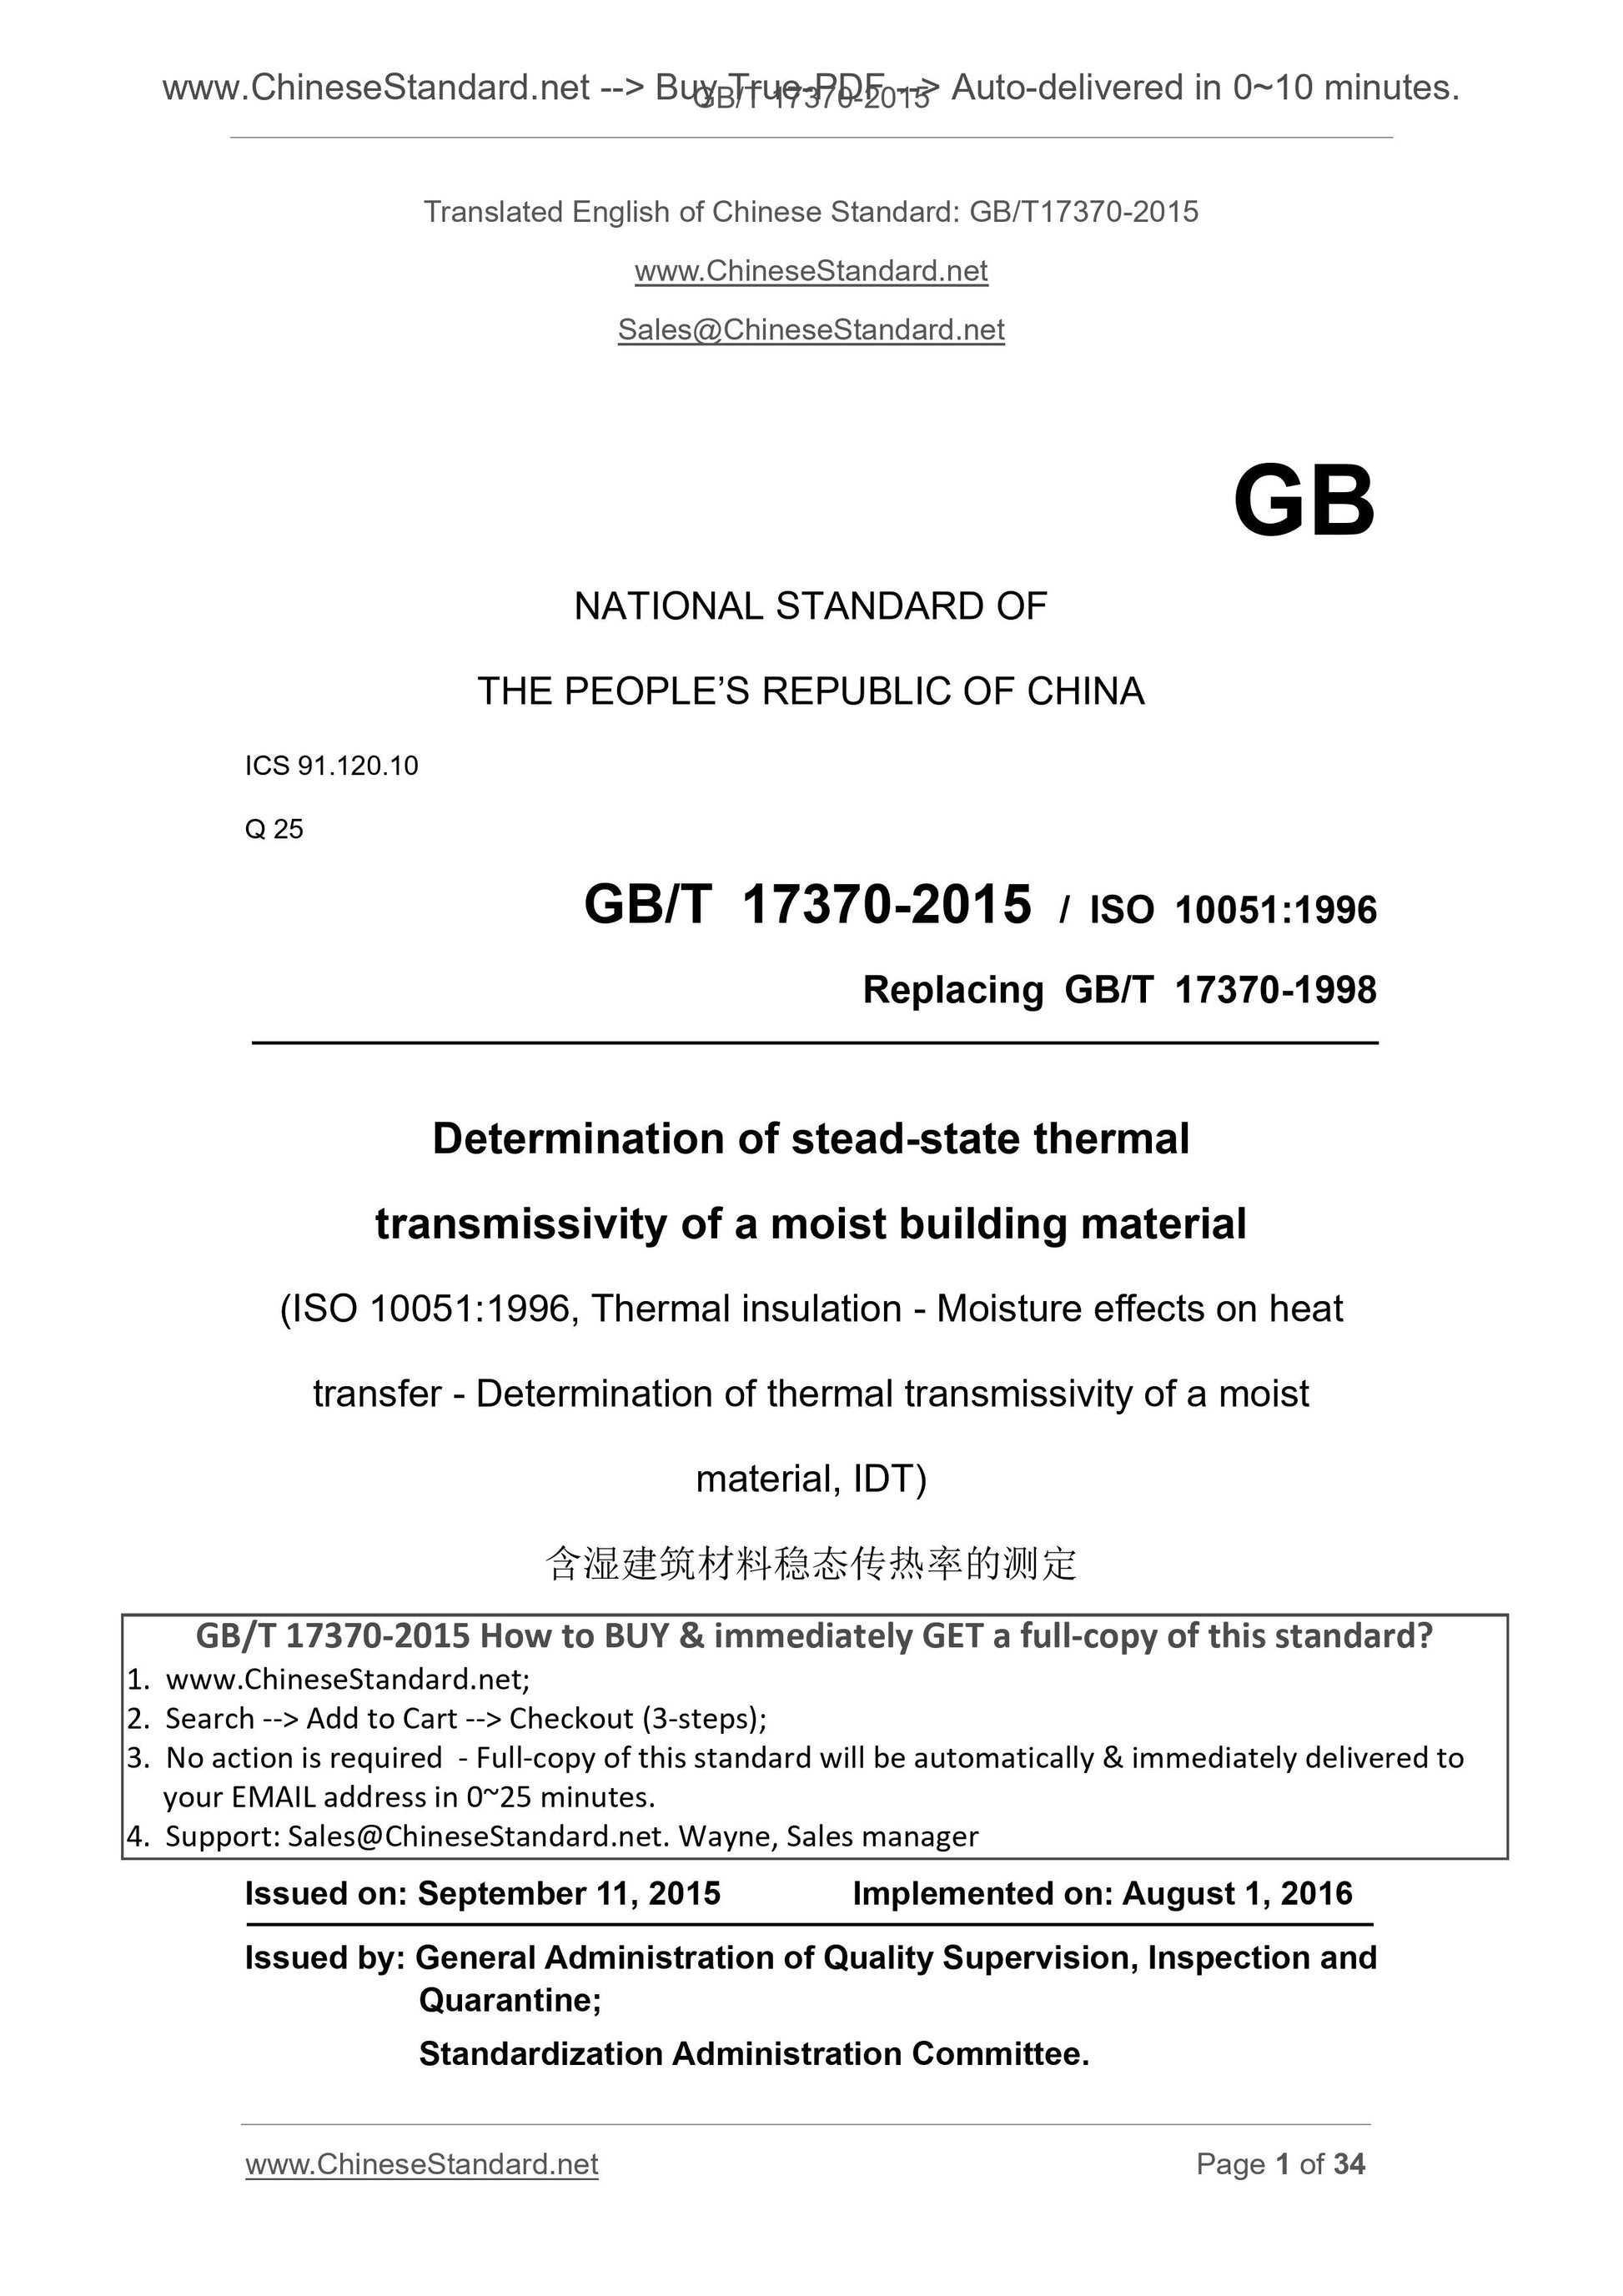 GB/T 17370-2015 Page 1